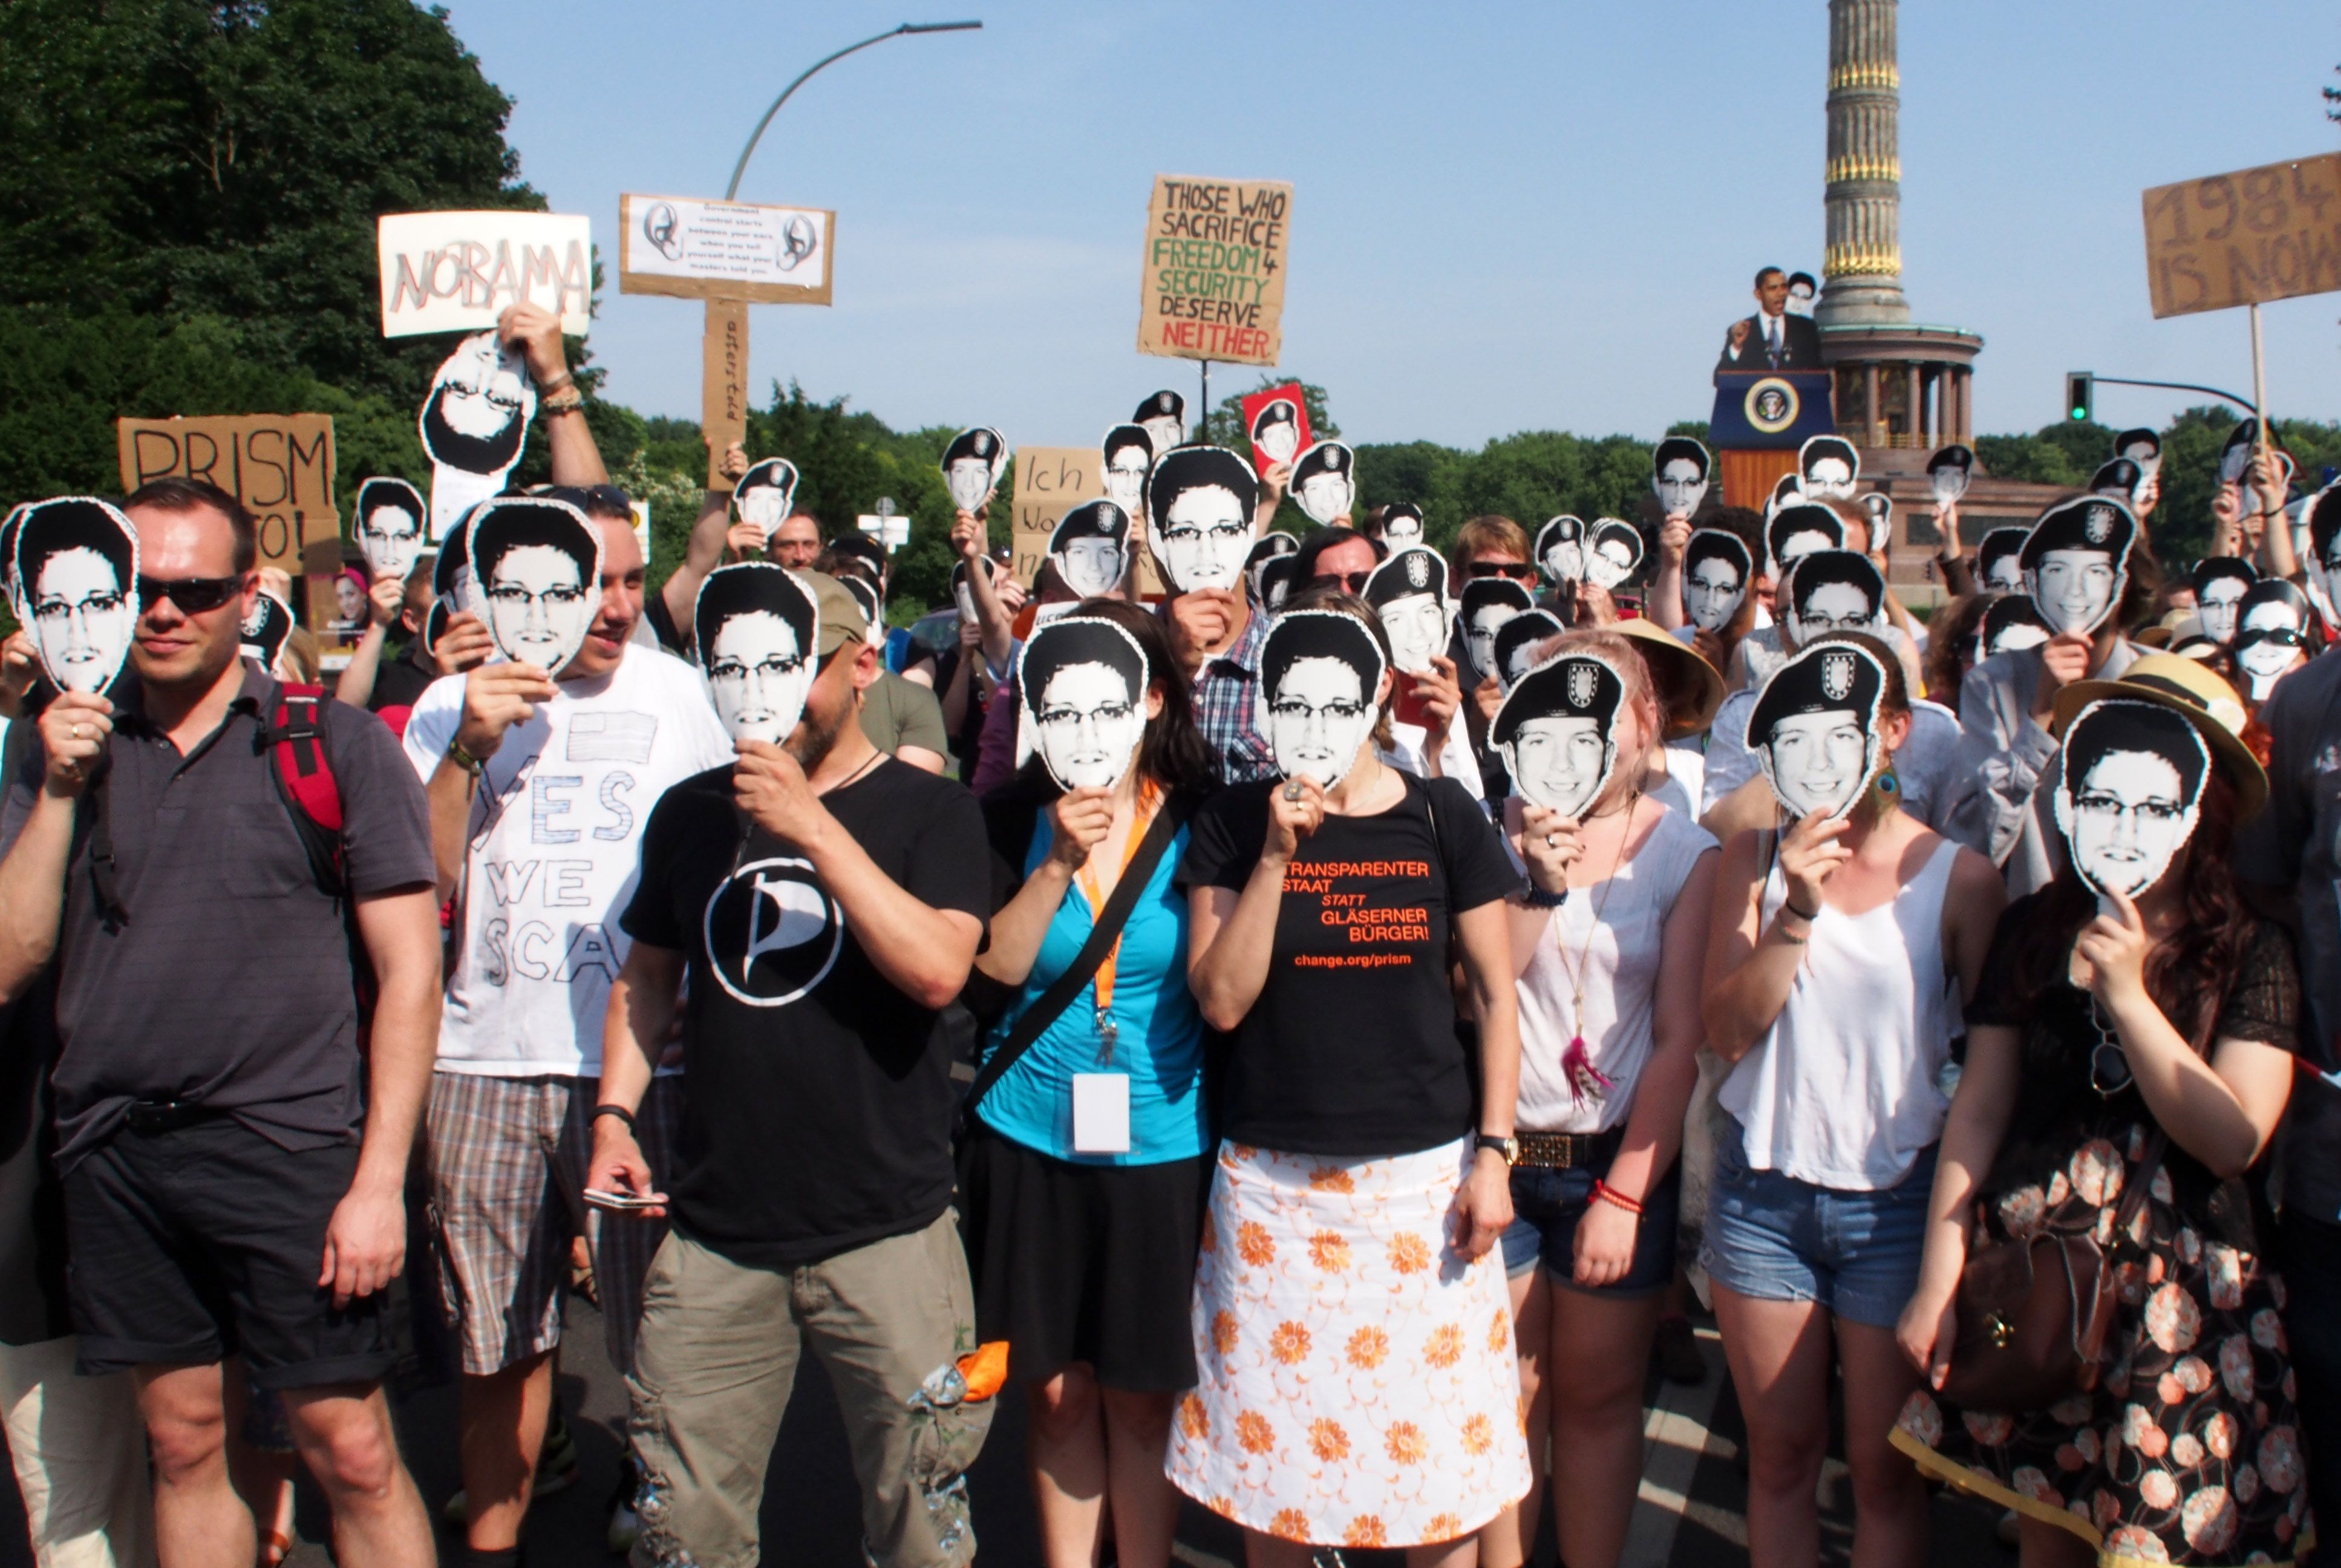  Demonstrators at a protest against the PRISM electronic surveillance program wear masks depicting Bradley Manning and Edward Snowden, on June 19, 2013 in Berlin